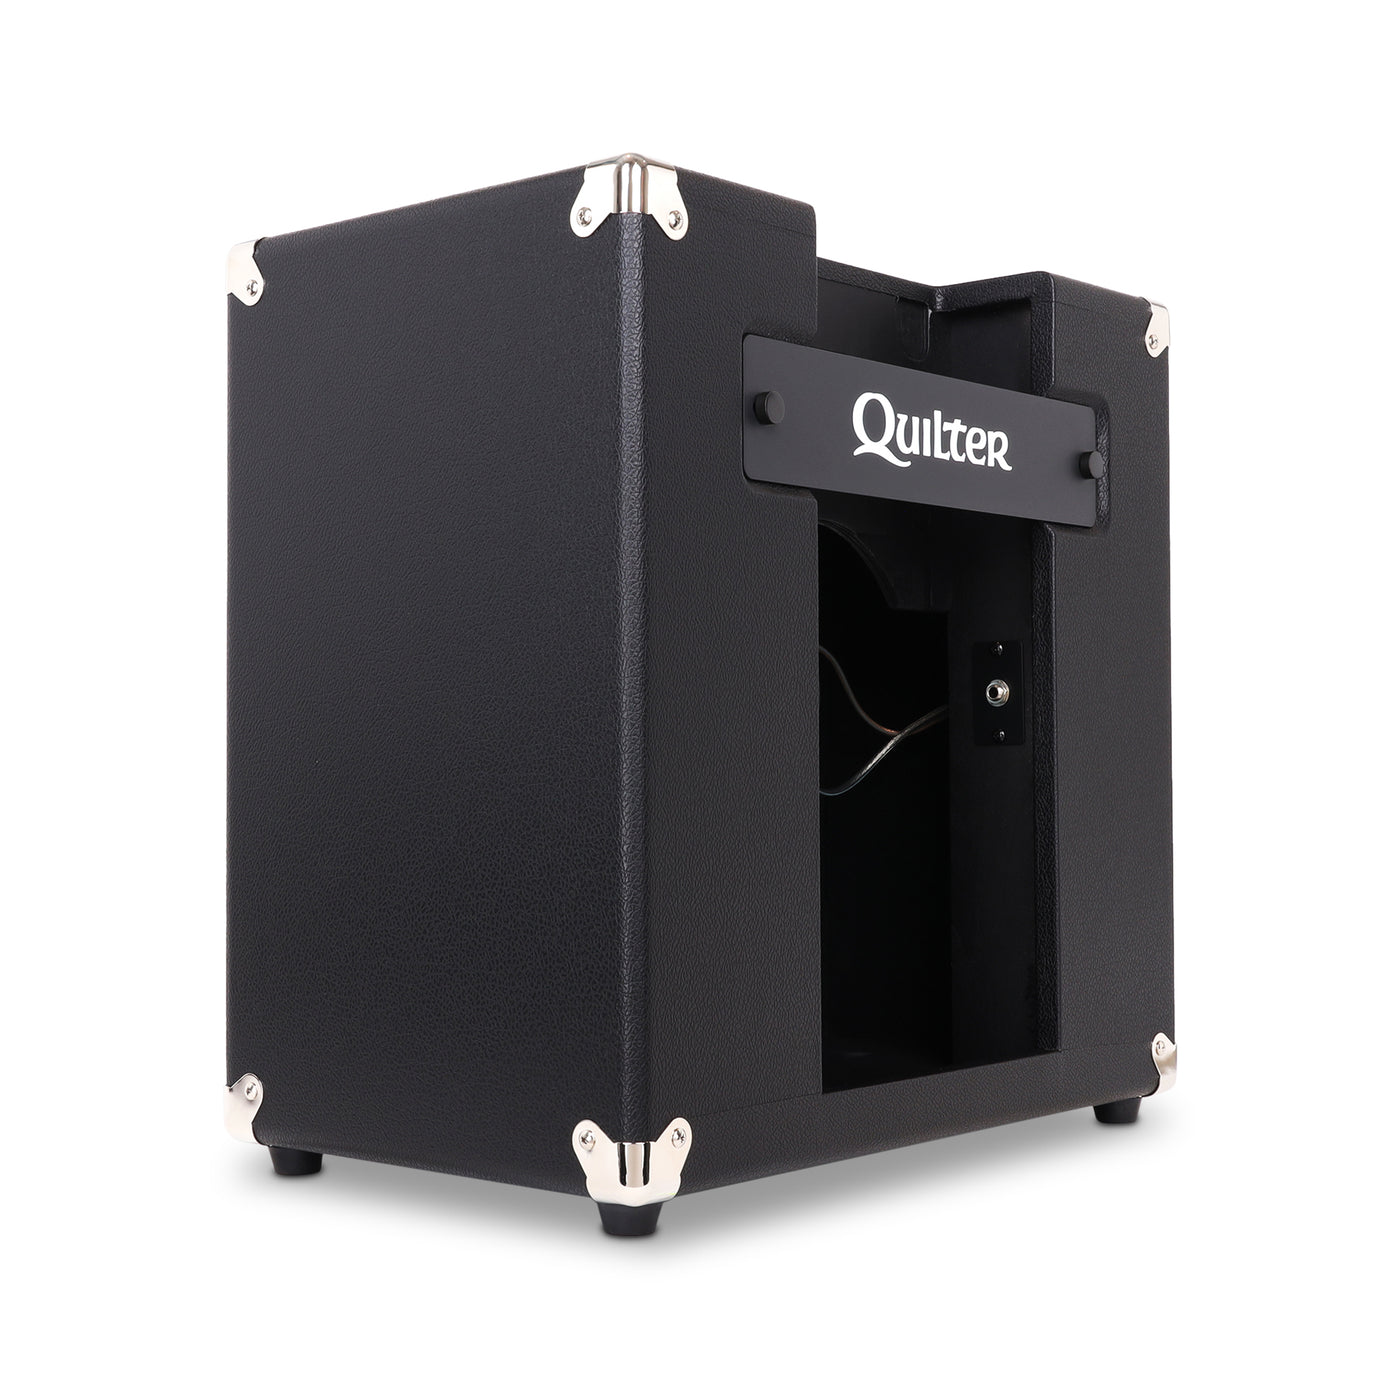 Quilter Labs BlockDock 15 amplifier cabinet - facing away diagonally to the left